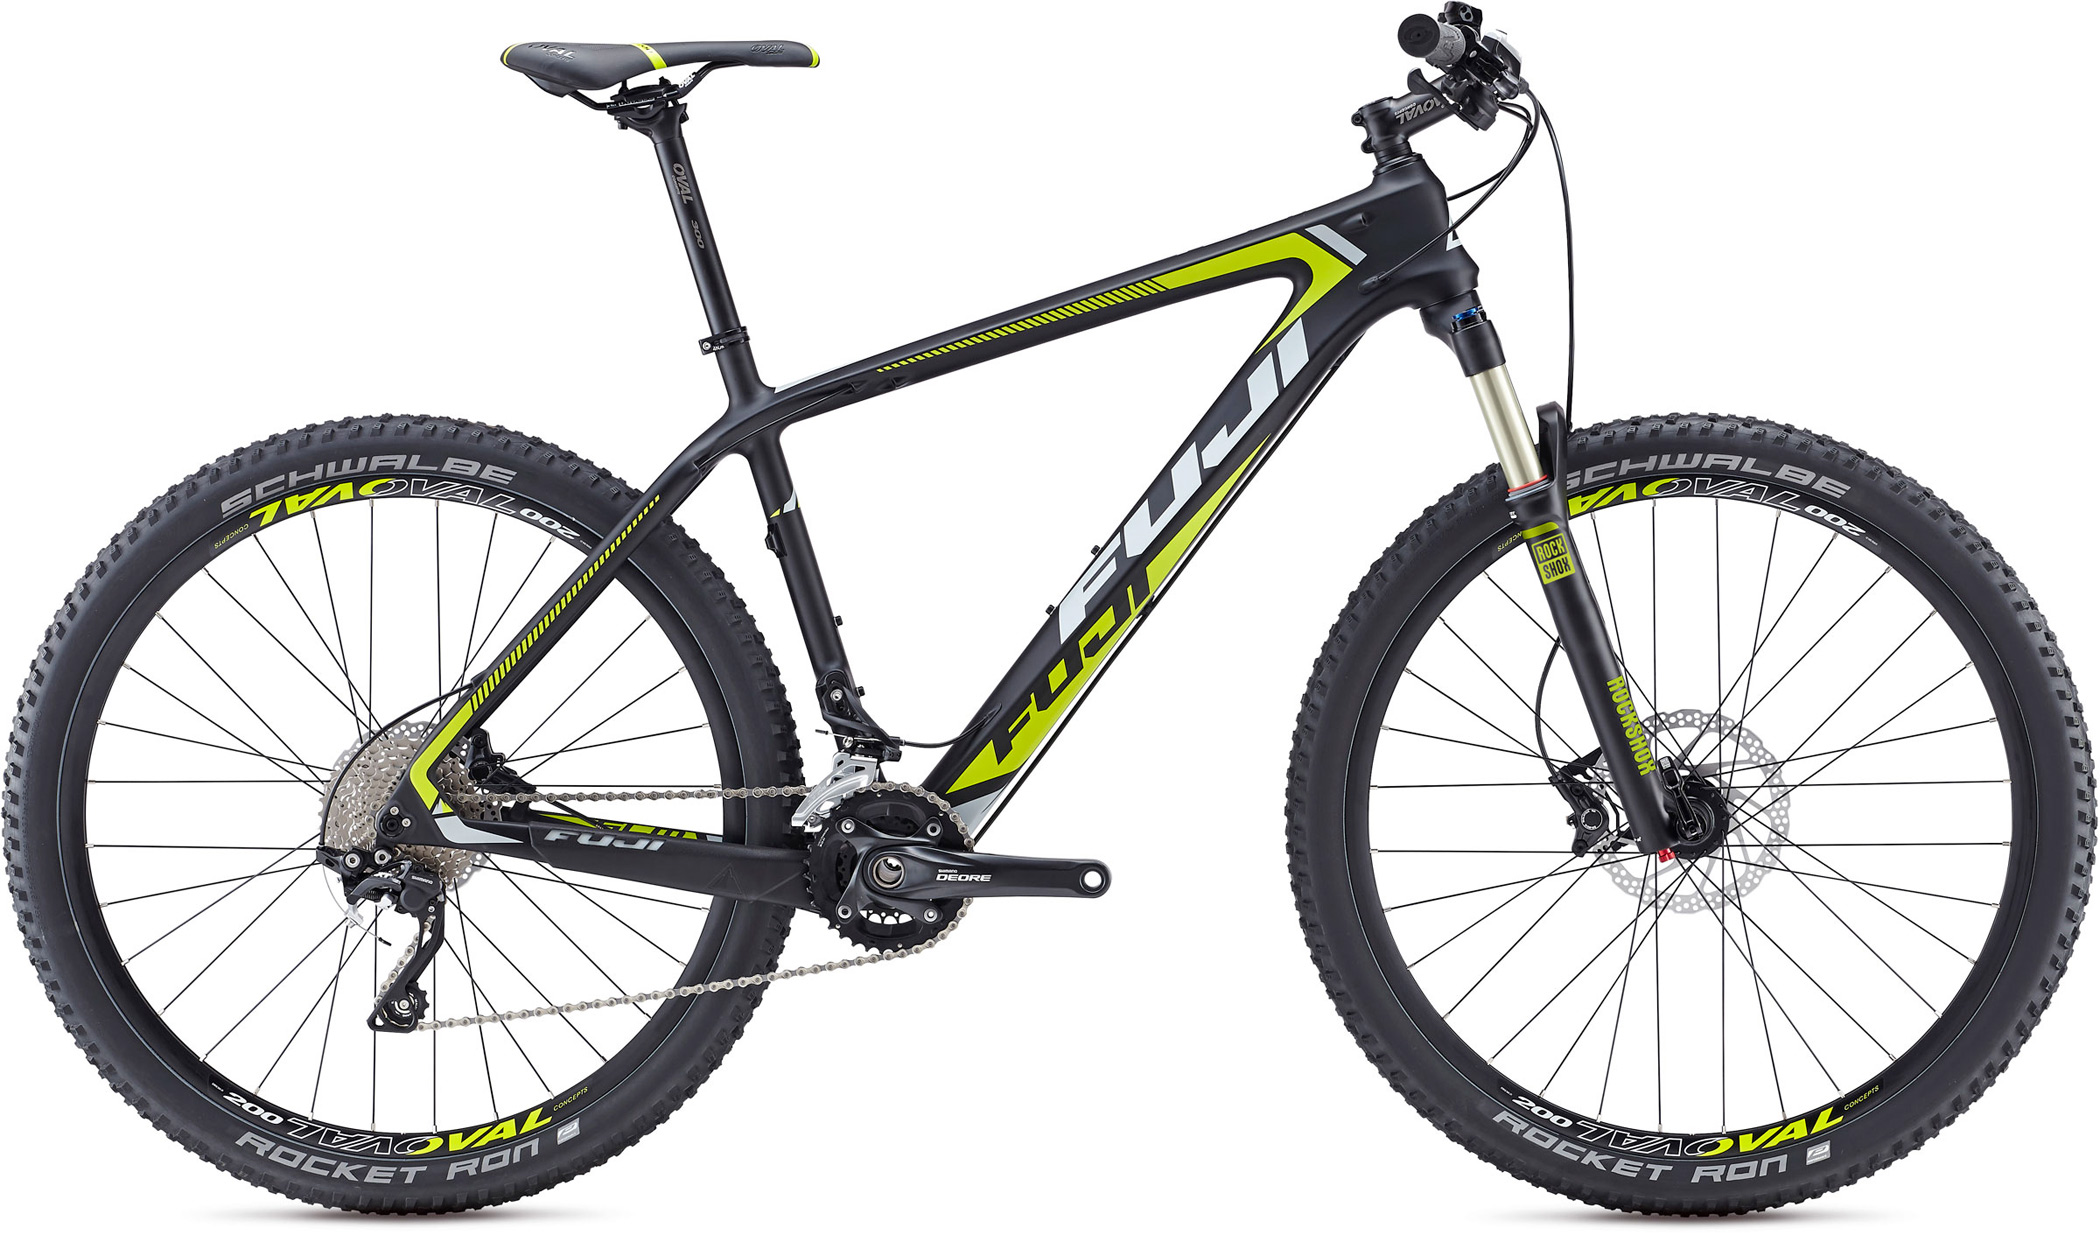 nogmaals Kwik Oorlogsschip Save up to 60% off Mountain Bikes - MTB - New Carbon Fiber Fuji SLM 2.5 /  27.5 27.5 Carbon Mountain Bikes with Shimano Deore / XT 2x10 Drivetrains,  Rockshox Lockout Suspension Forks